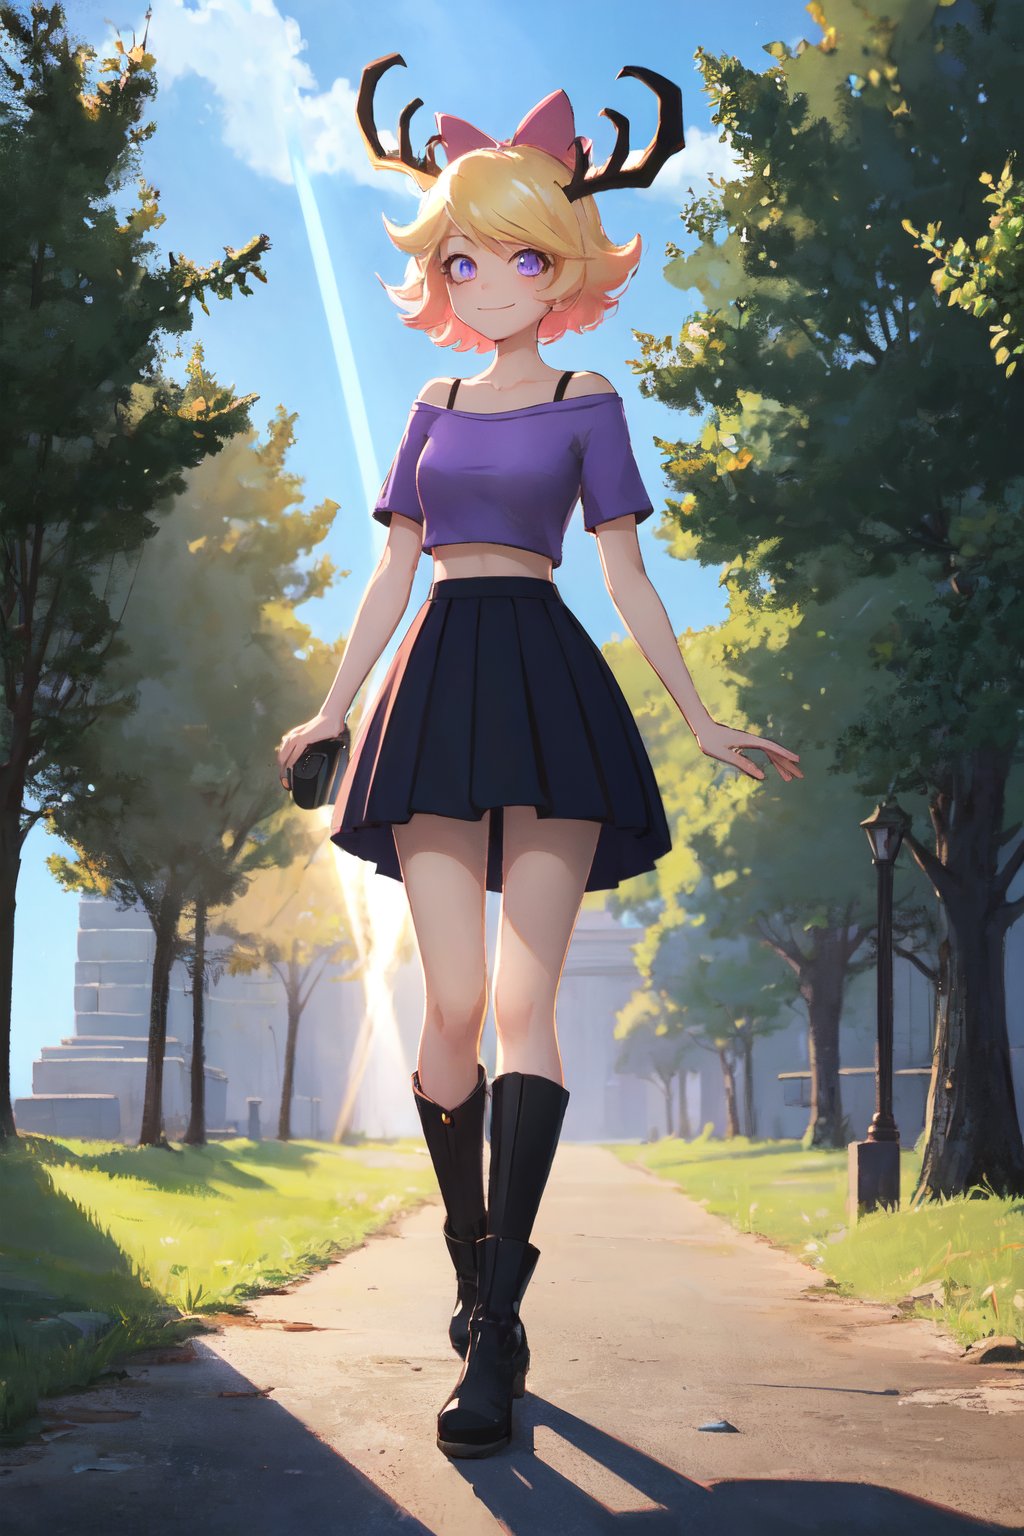 (extremely detailed fine touch:1.2) , masterpiece, best quality, highly quality, (cinematic lighting, dramatic lighting, epic lighting, light rays, ray tracing:1.2)
BREAK, 
wendi, 1girl, solo, alone, short hair, yellow hair, gradient hair, antlers on head, purple bow on head, purple eyes, :), smile, closed mouth, crop top, magenta shirt, off-shoulder_shirt, magenta skirt, long stockings, strip stockings, black boots, standing, arms_at_sides, walking, full body, dynamic angle, 
BREAK, 
outdoor, park, trees, sunny day, blue sky, complex_background, detailed background